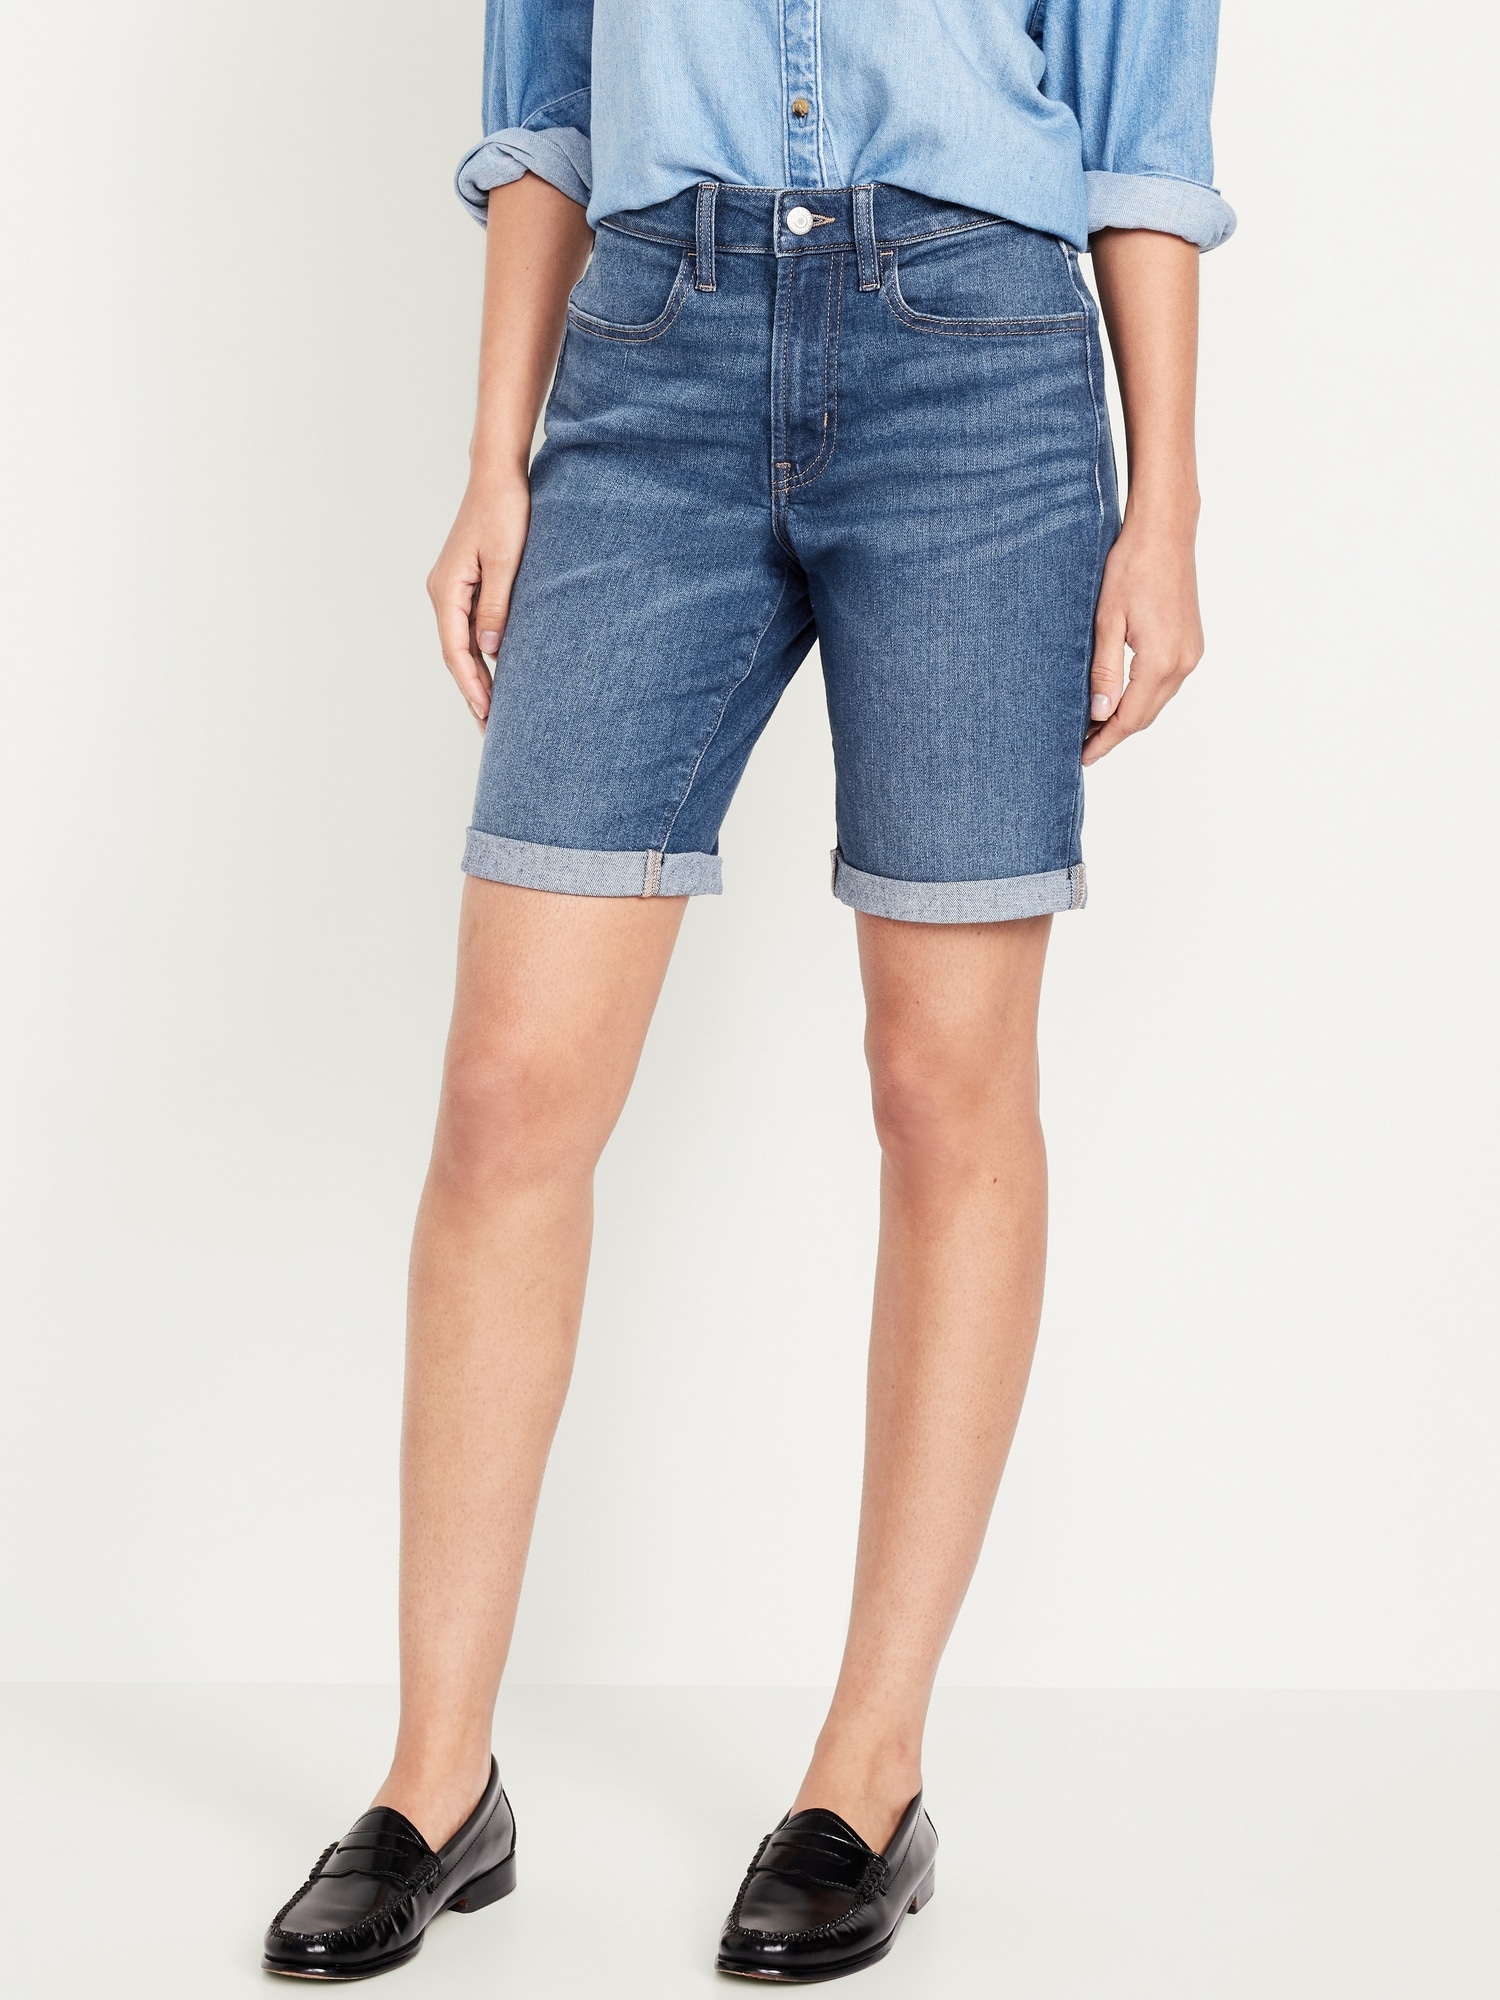 Old Navy High-Waisted Button-Fly O.G. Straight Distressed Cut-Off Jean  Shorts for Women -- 9-inch inseam